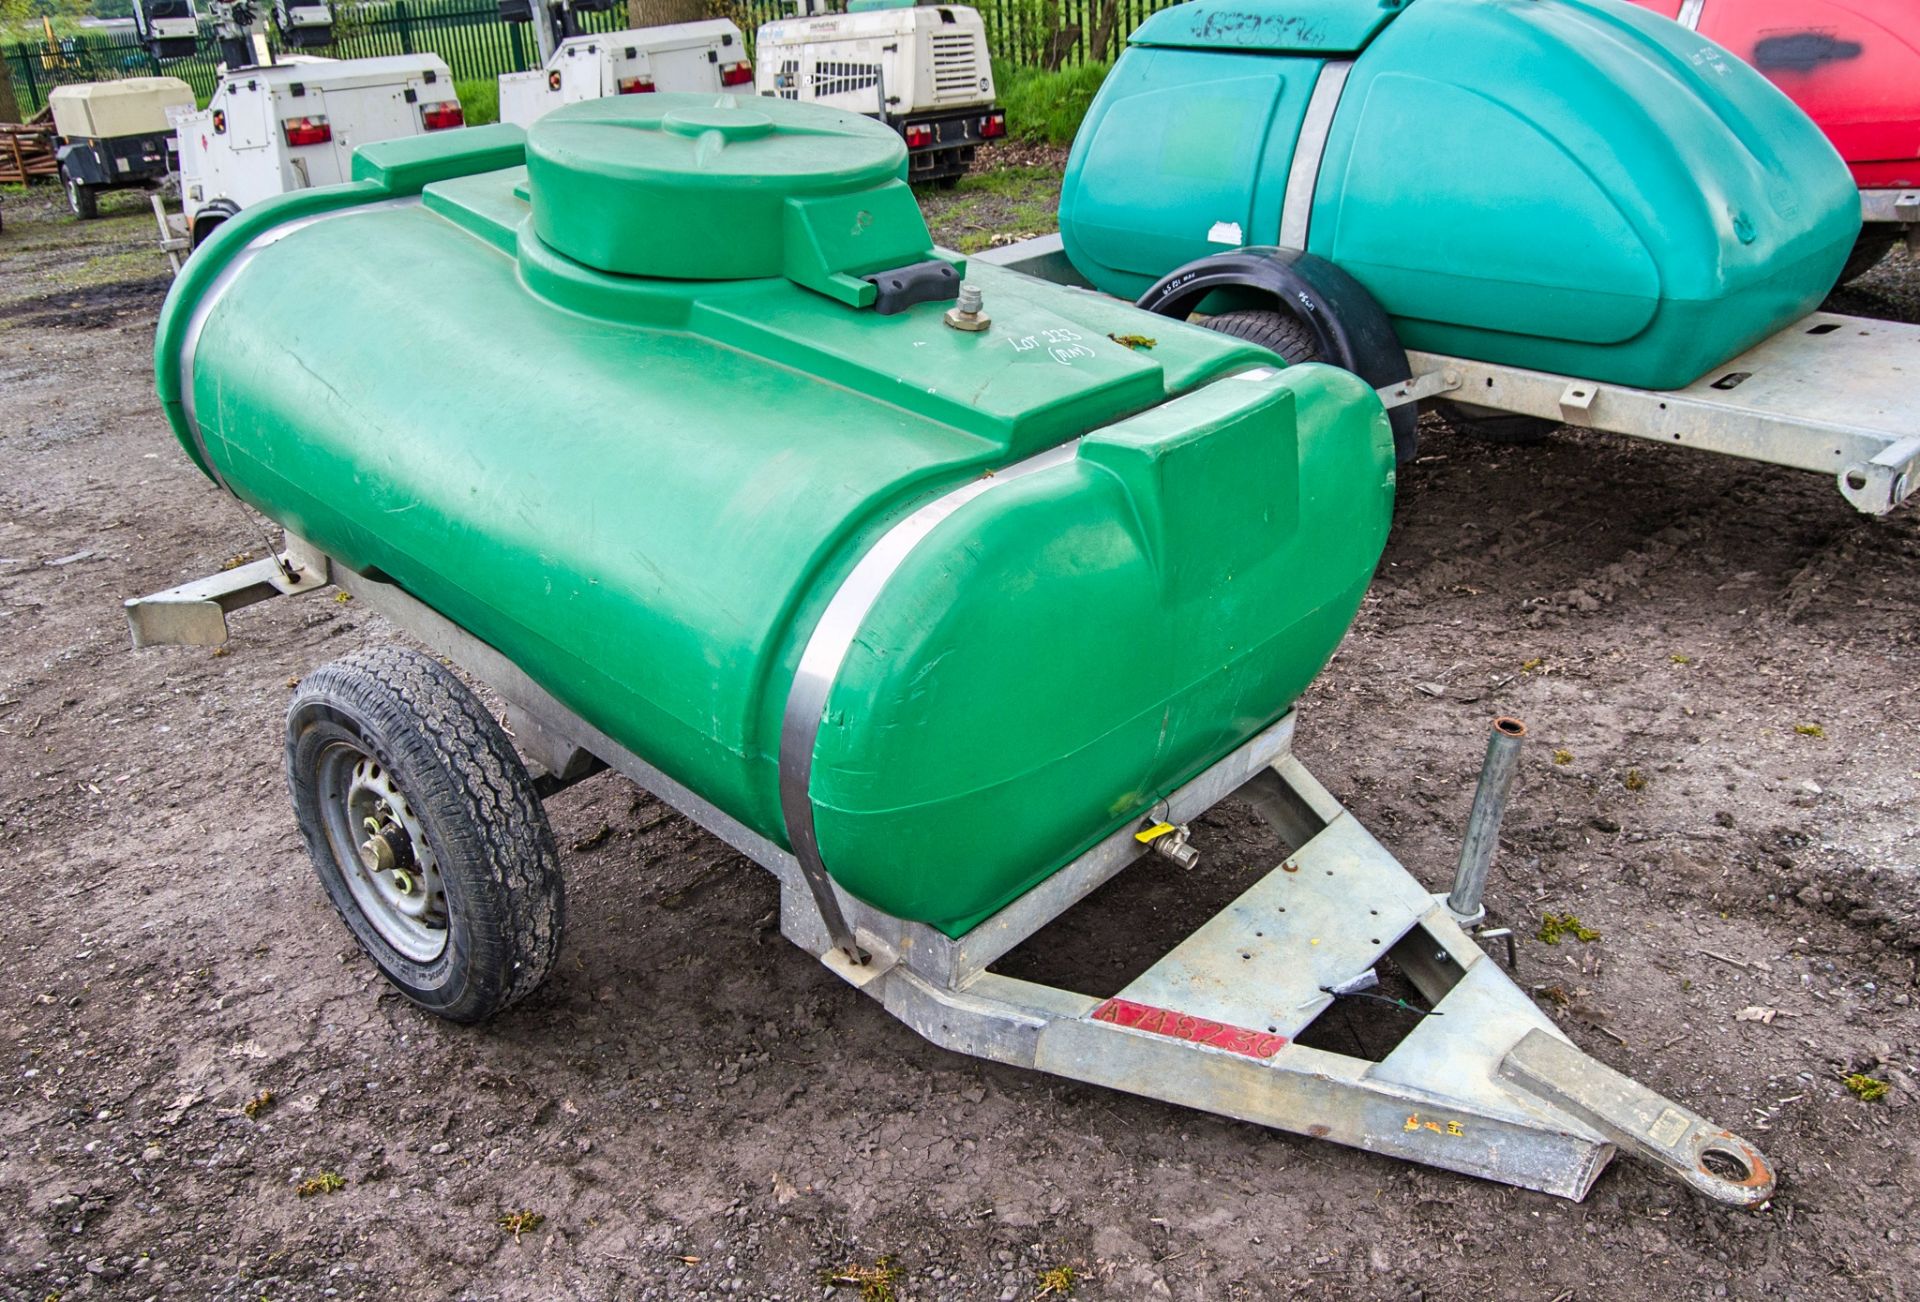 Trailer Engineering 1000 litre site tow mobile water bowser A748236 - Image 2 of 6